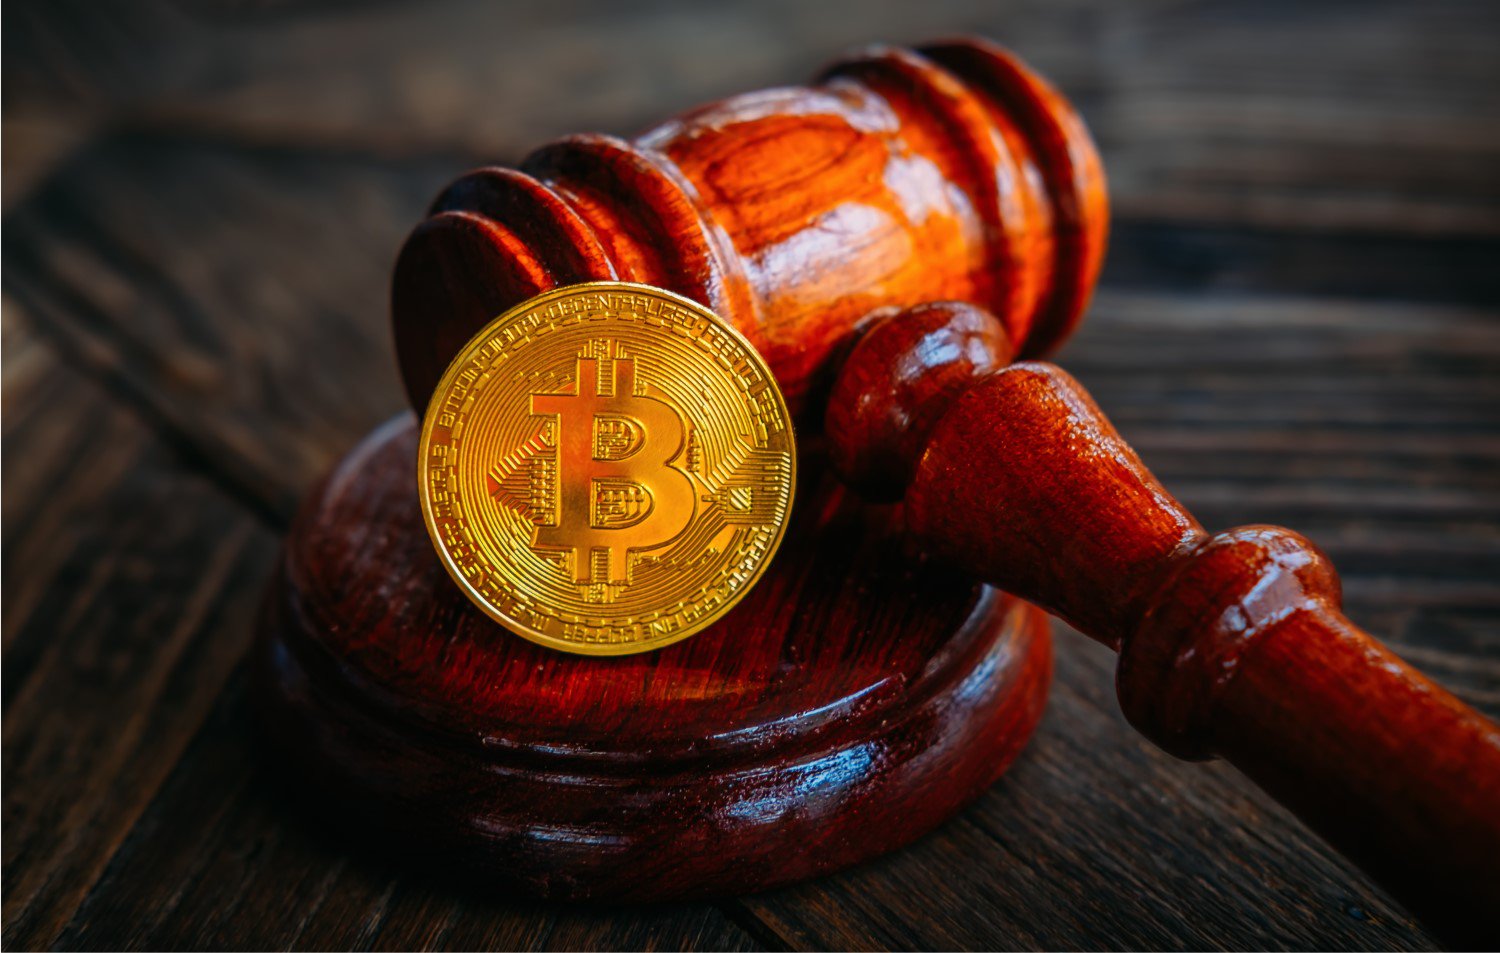 CFTC Fines Bitcoin Trader $1.1 Million For Crypto Fraud